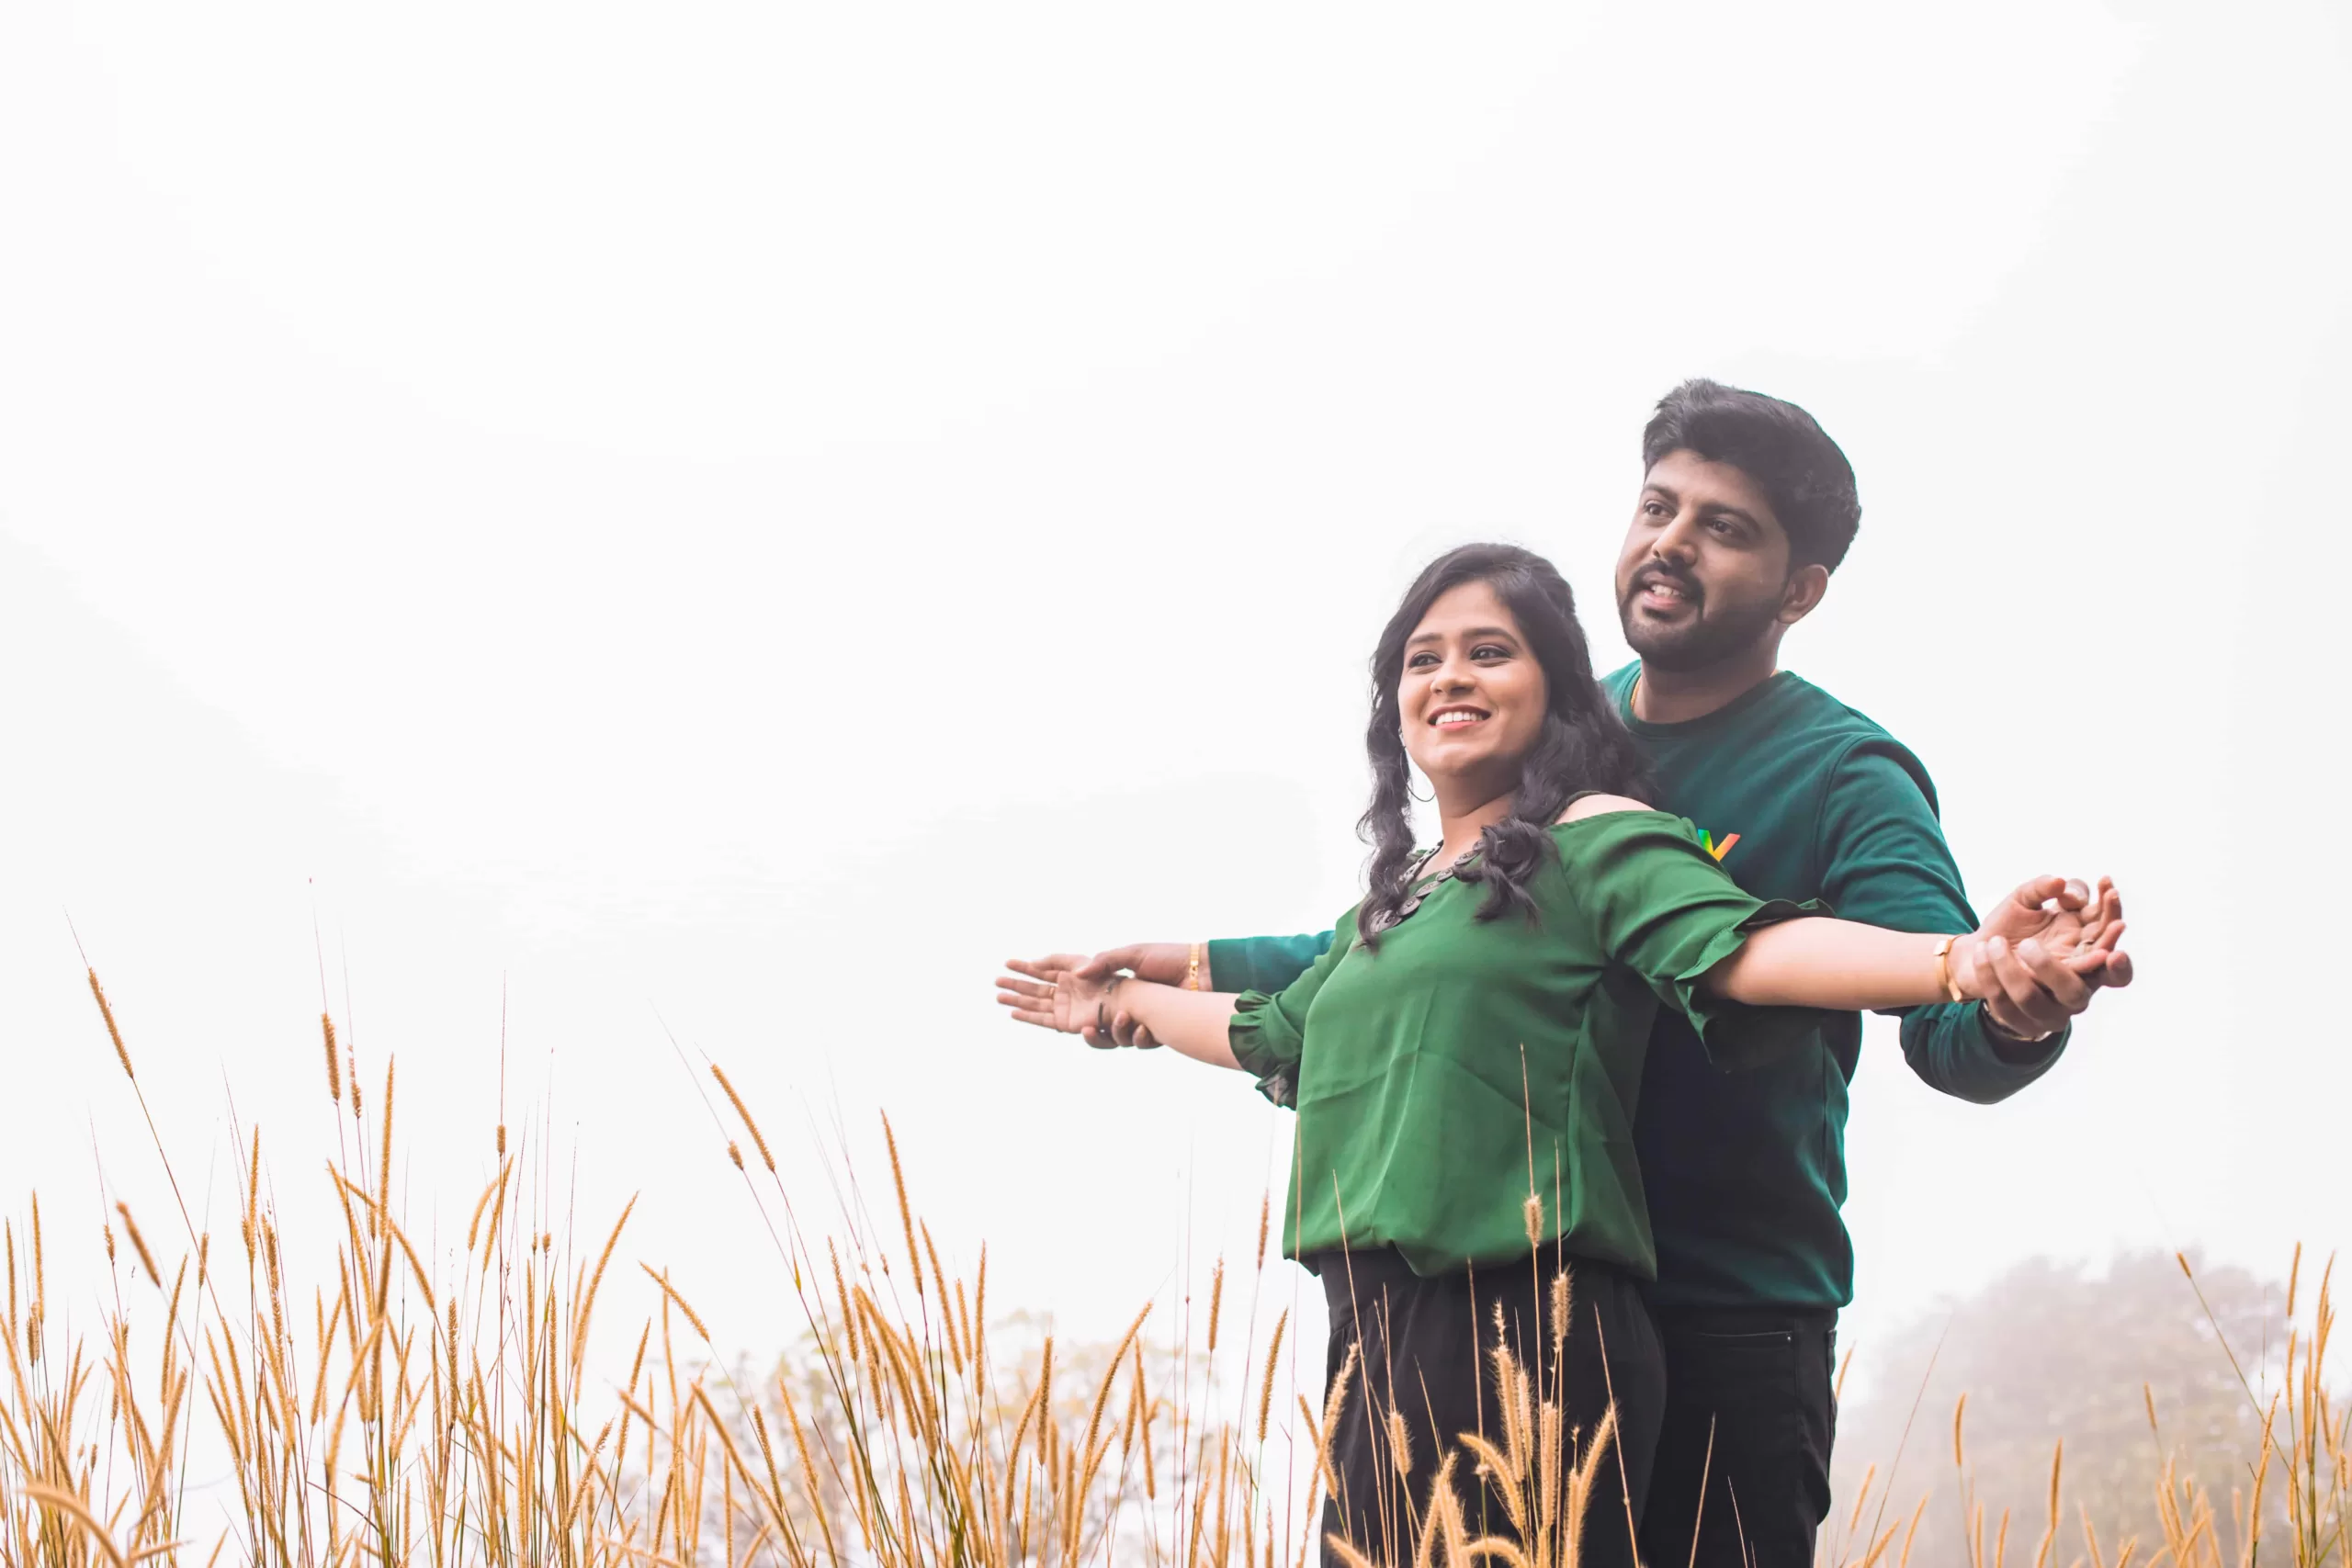 The love between Aditya and Harshita was palpable, even amidst the pre- wedding jitters and giggles that added a touch of fun to their pic... |  Instagram